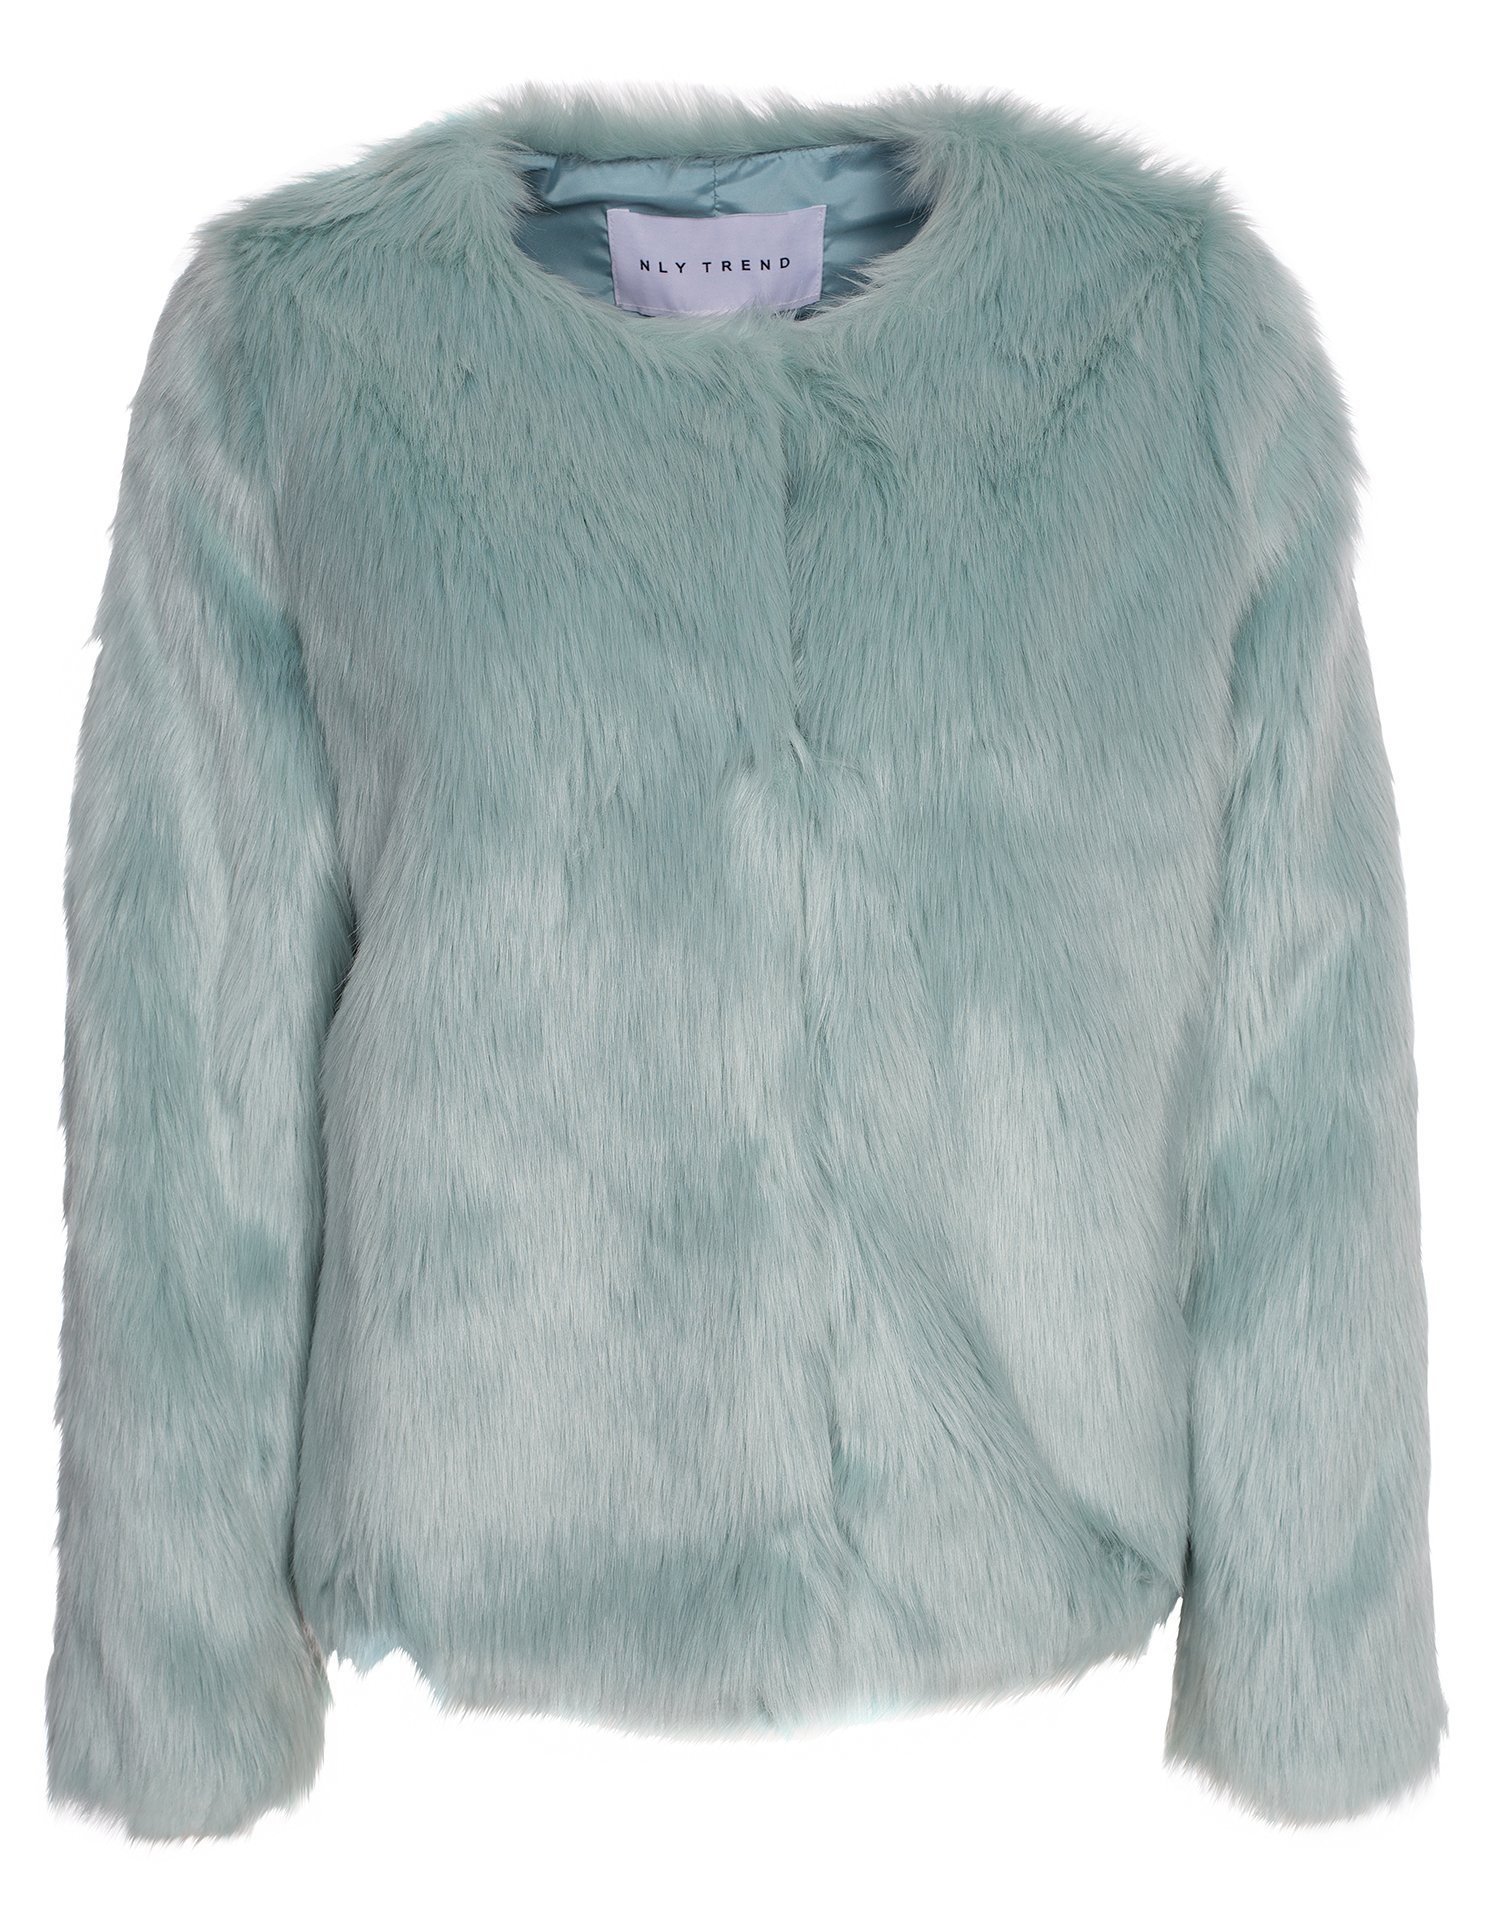 Ice Cream Fake Fur - Nly Trend - Mint - Jackets - Clothing - Women ...